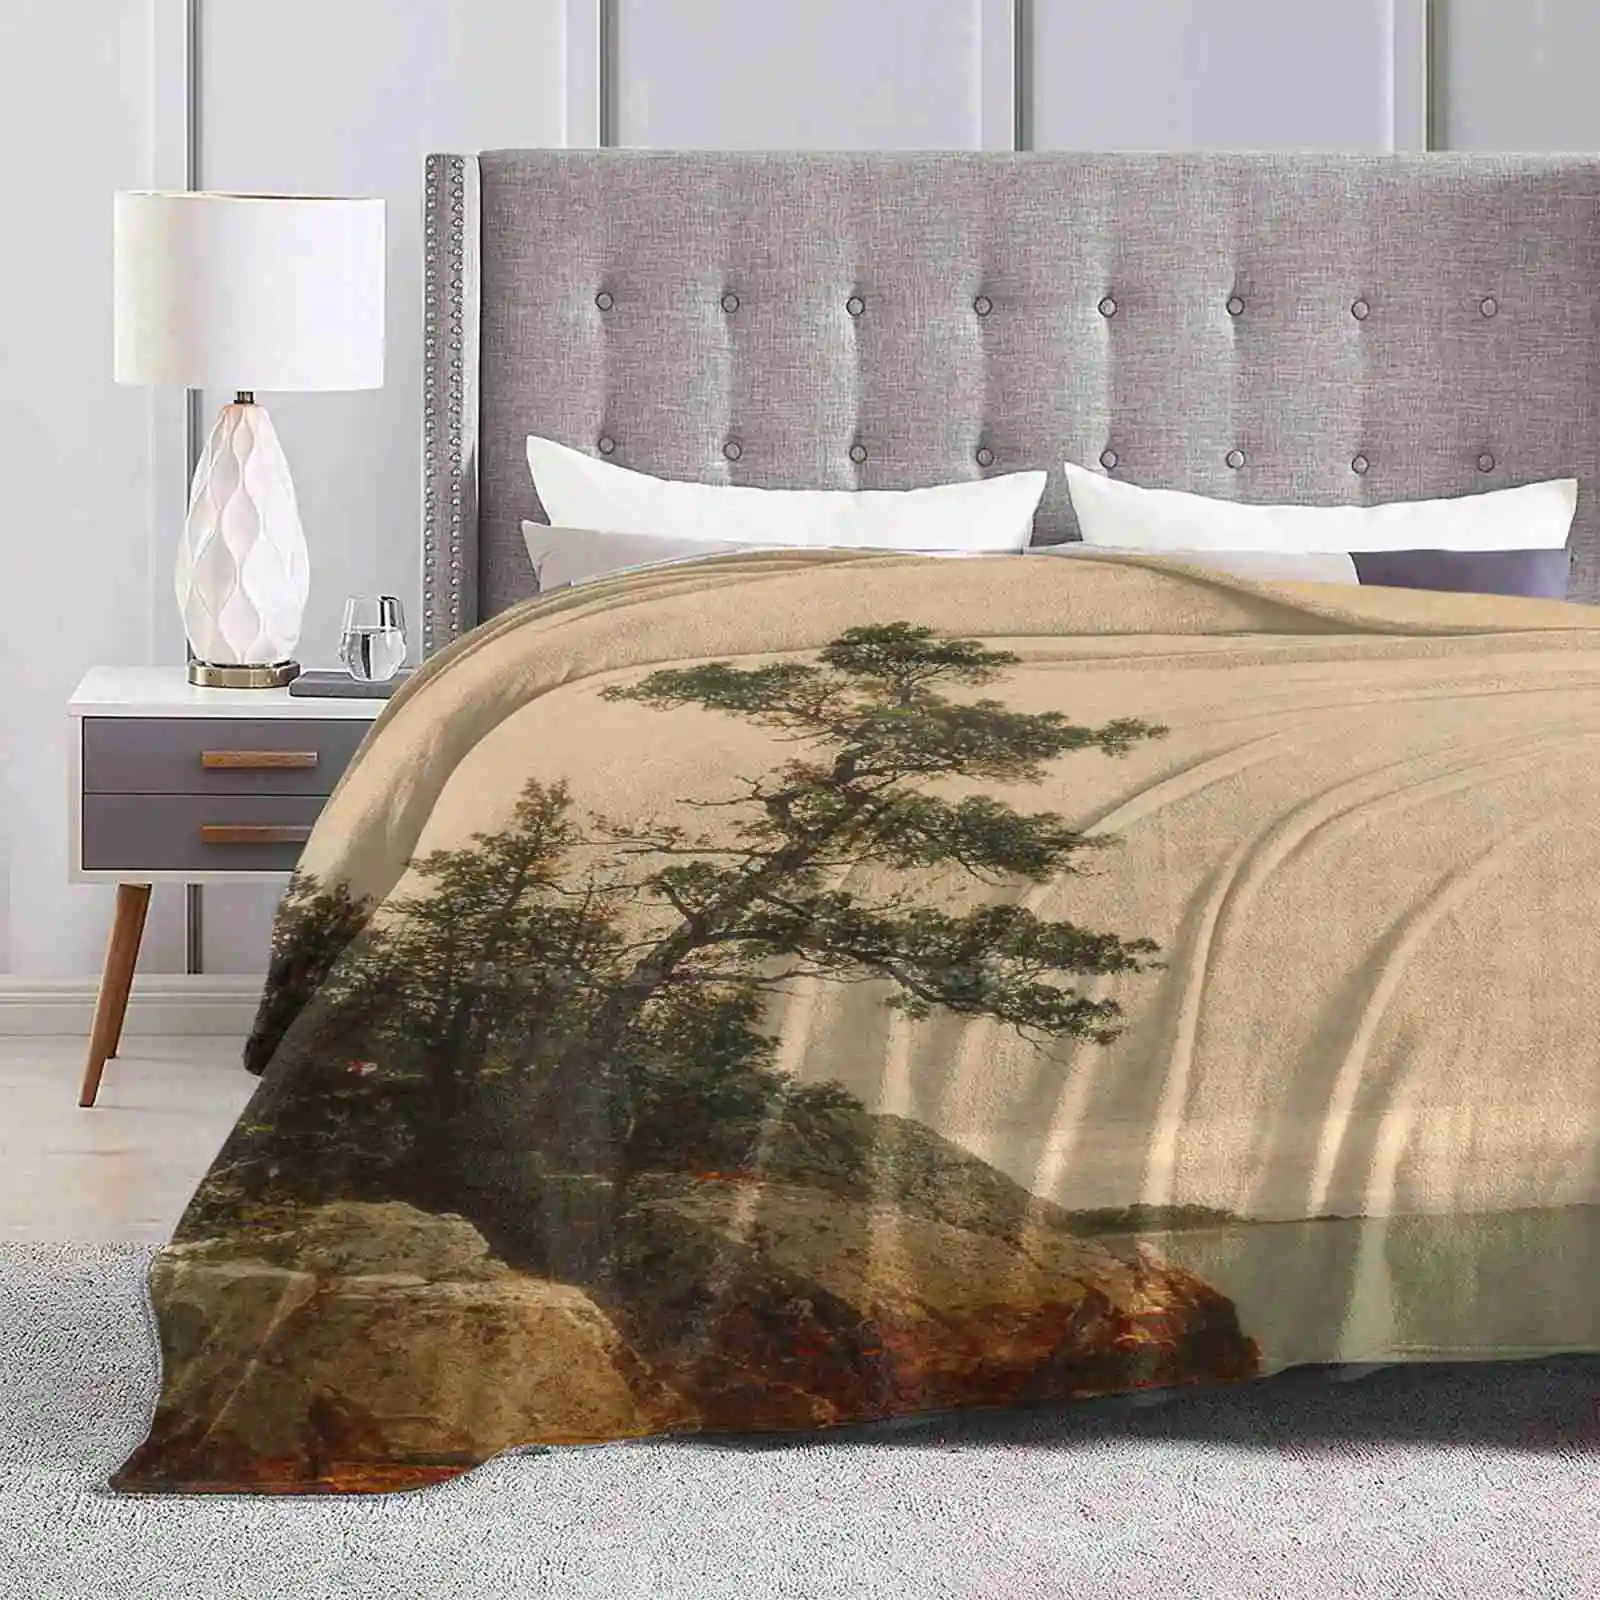 

By The Sea Pine Tree Vintage Art All Sizes Soft Cover Blanket Home Decor Bedding By The Sea Pine Tree Beach Greenery Scenery